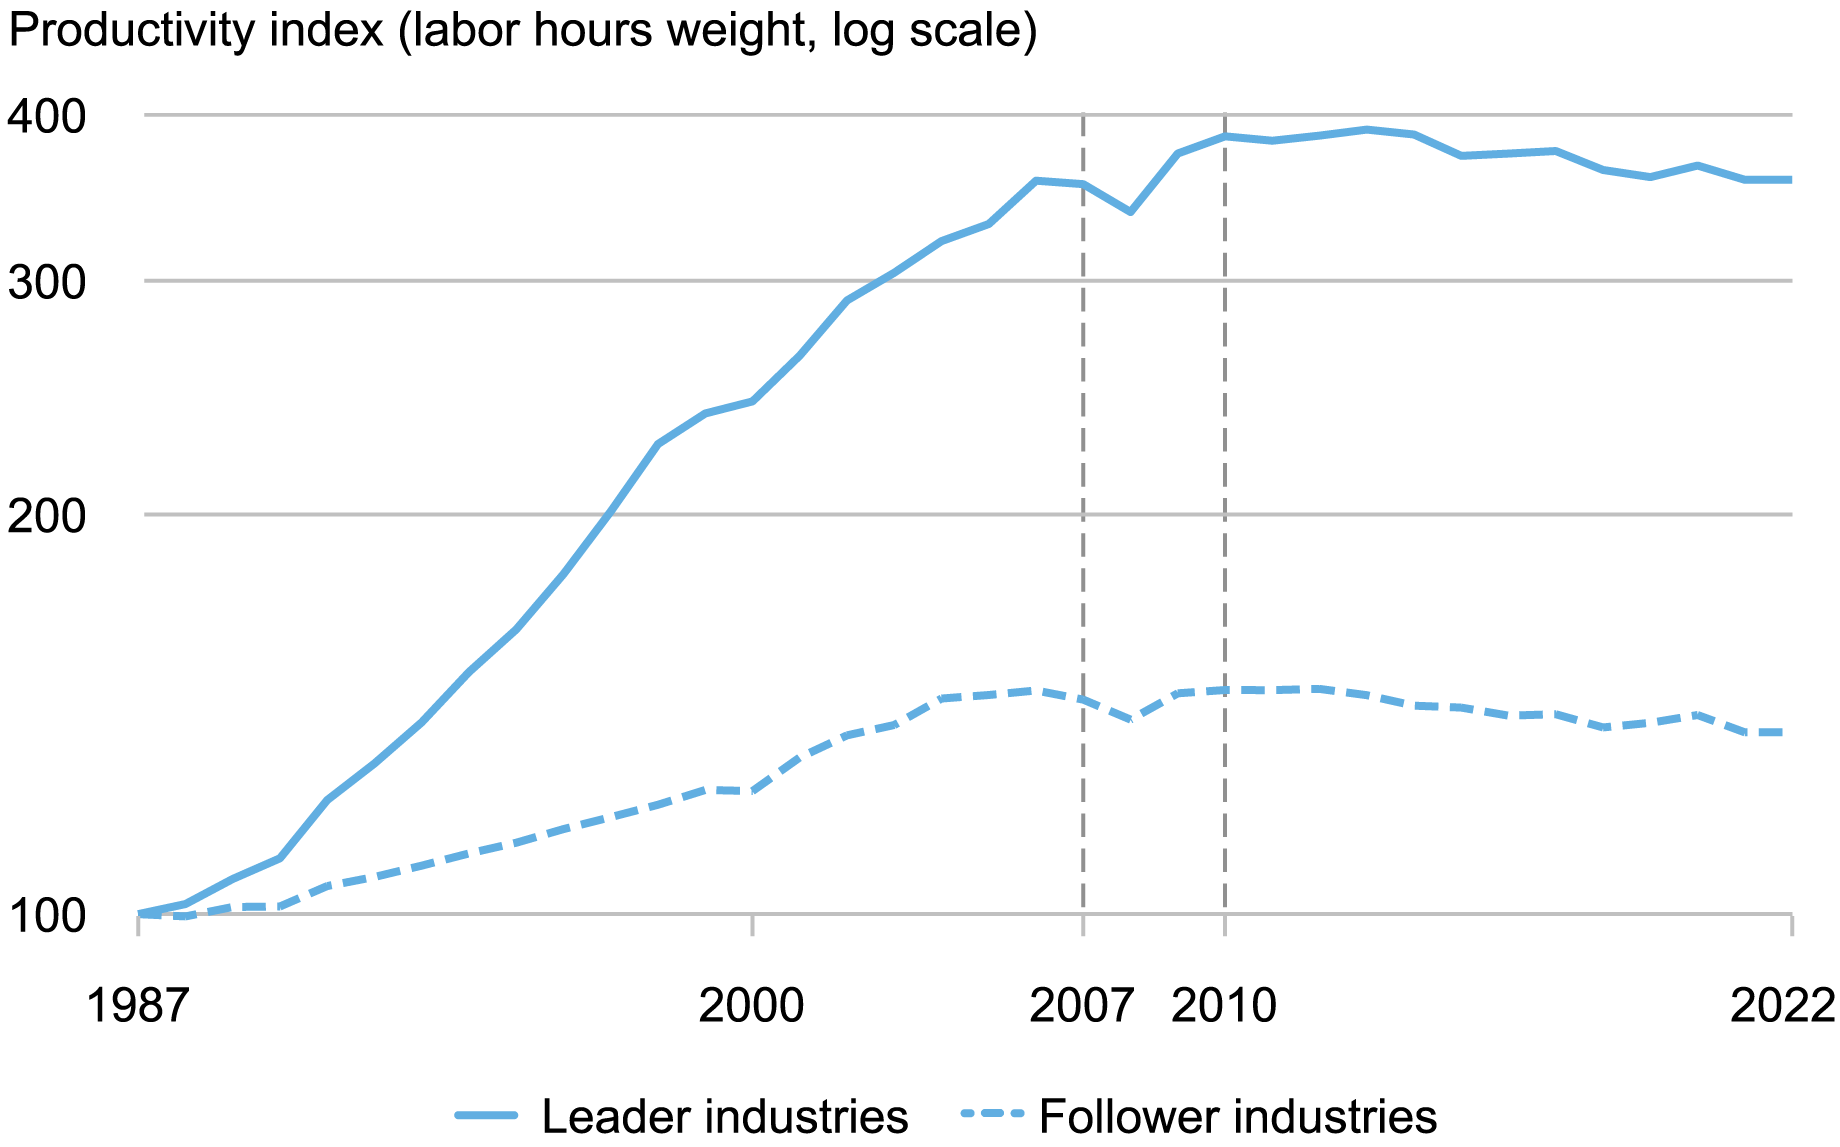 line chart tracking labor productivity index from 1987 to 2022 for fast-growing leader industries (blue solid) and slow-growing follower industries (blue dotted)